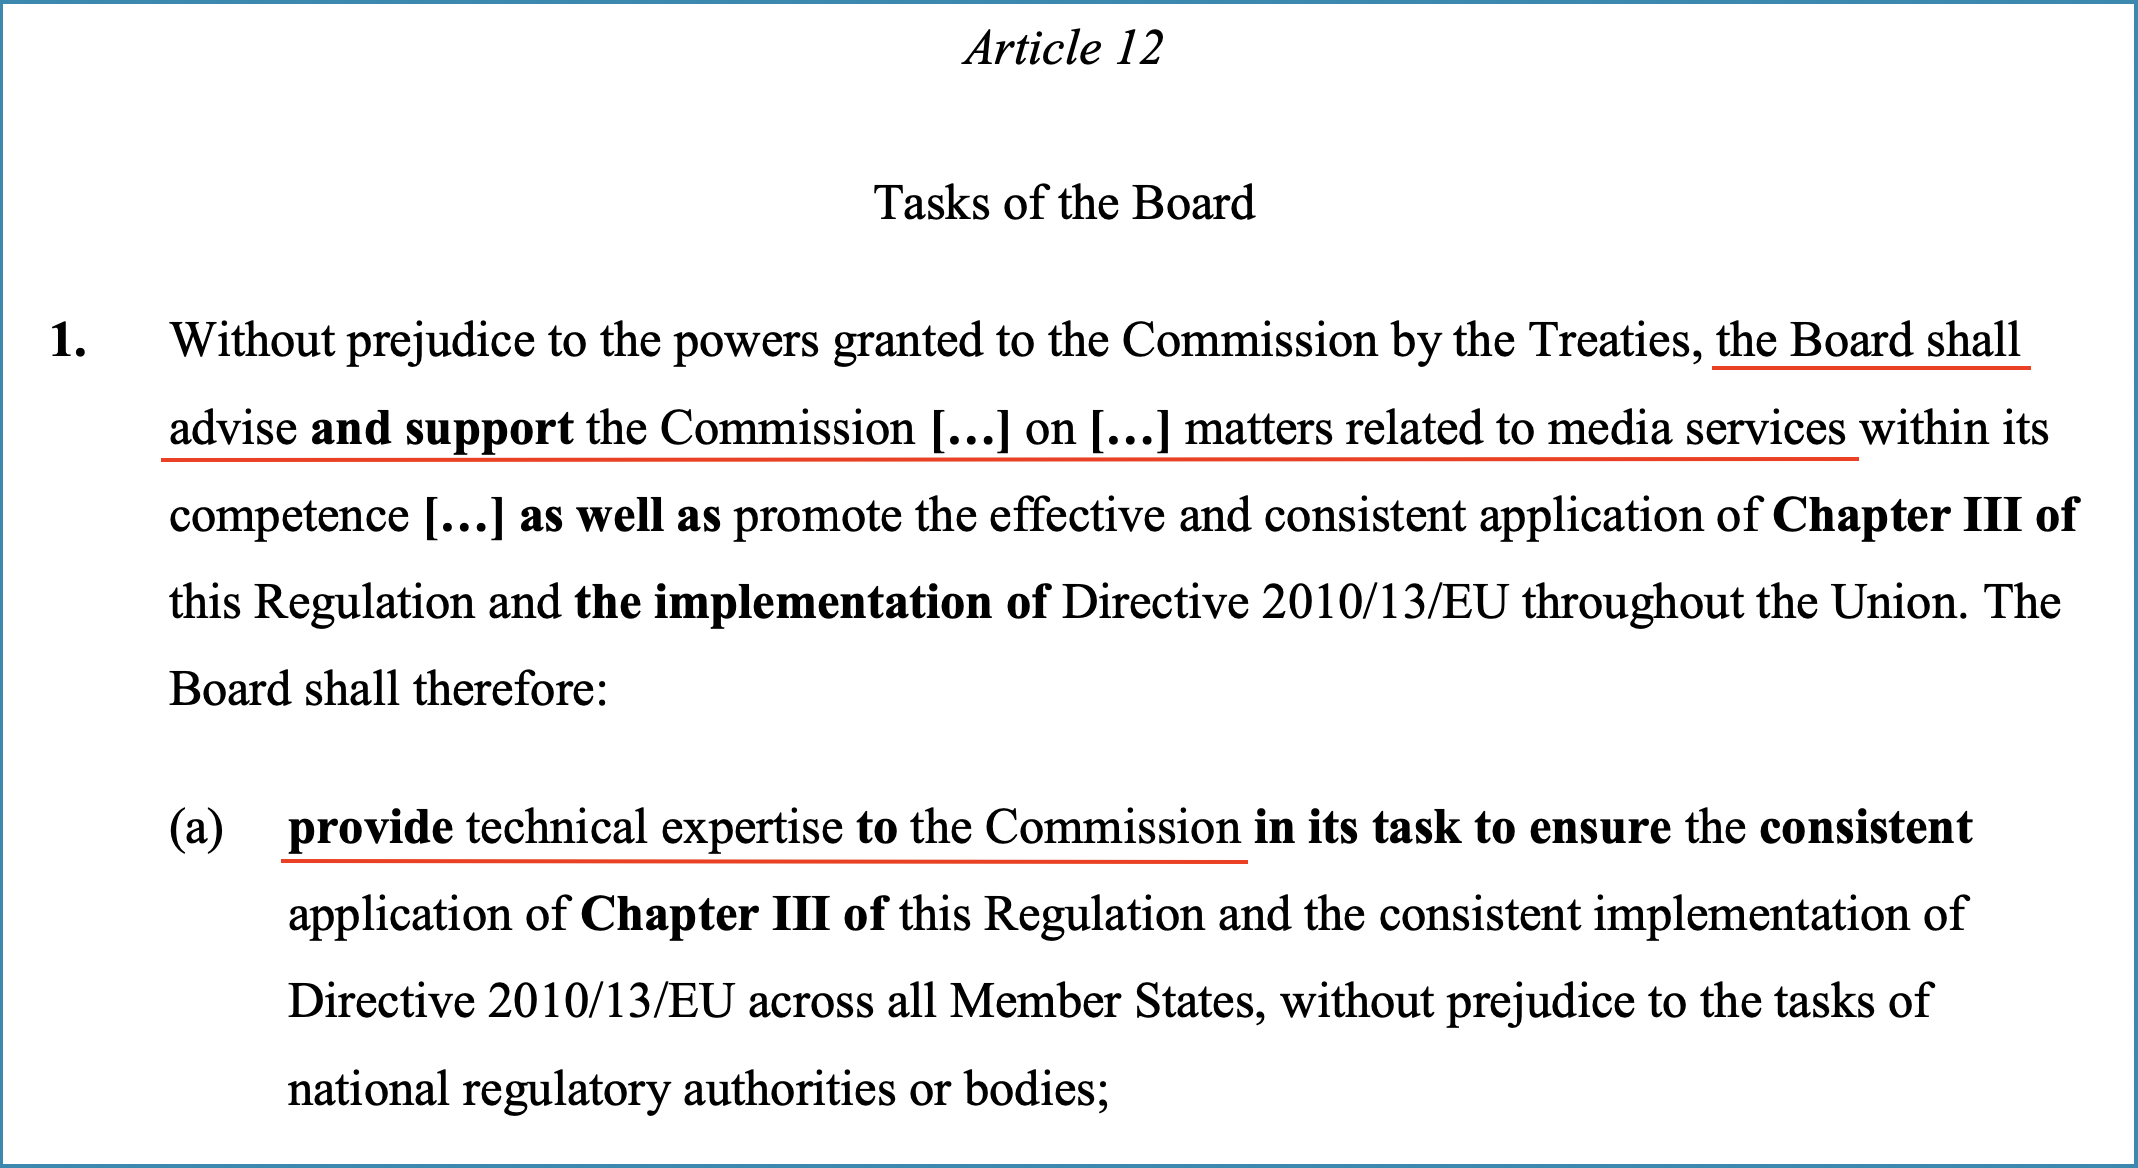 Article 12 - Tasks of the Board